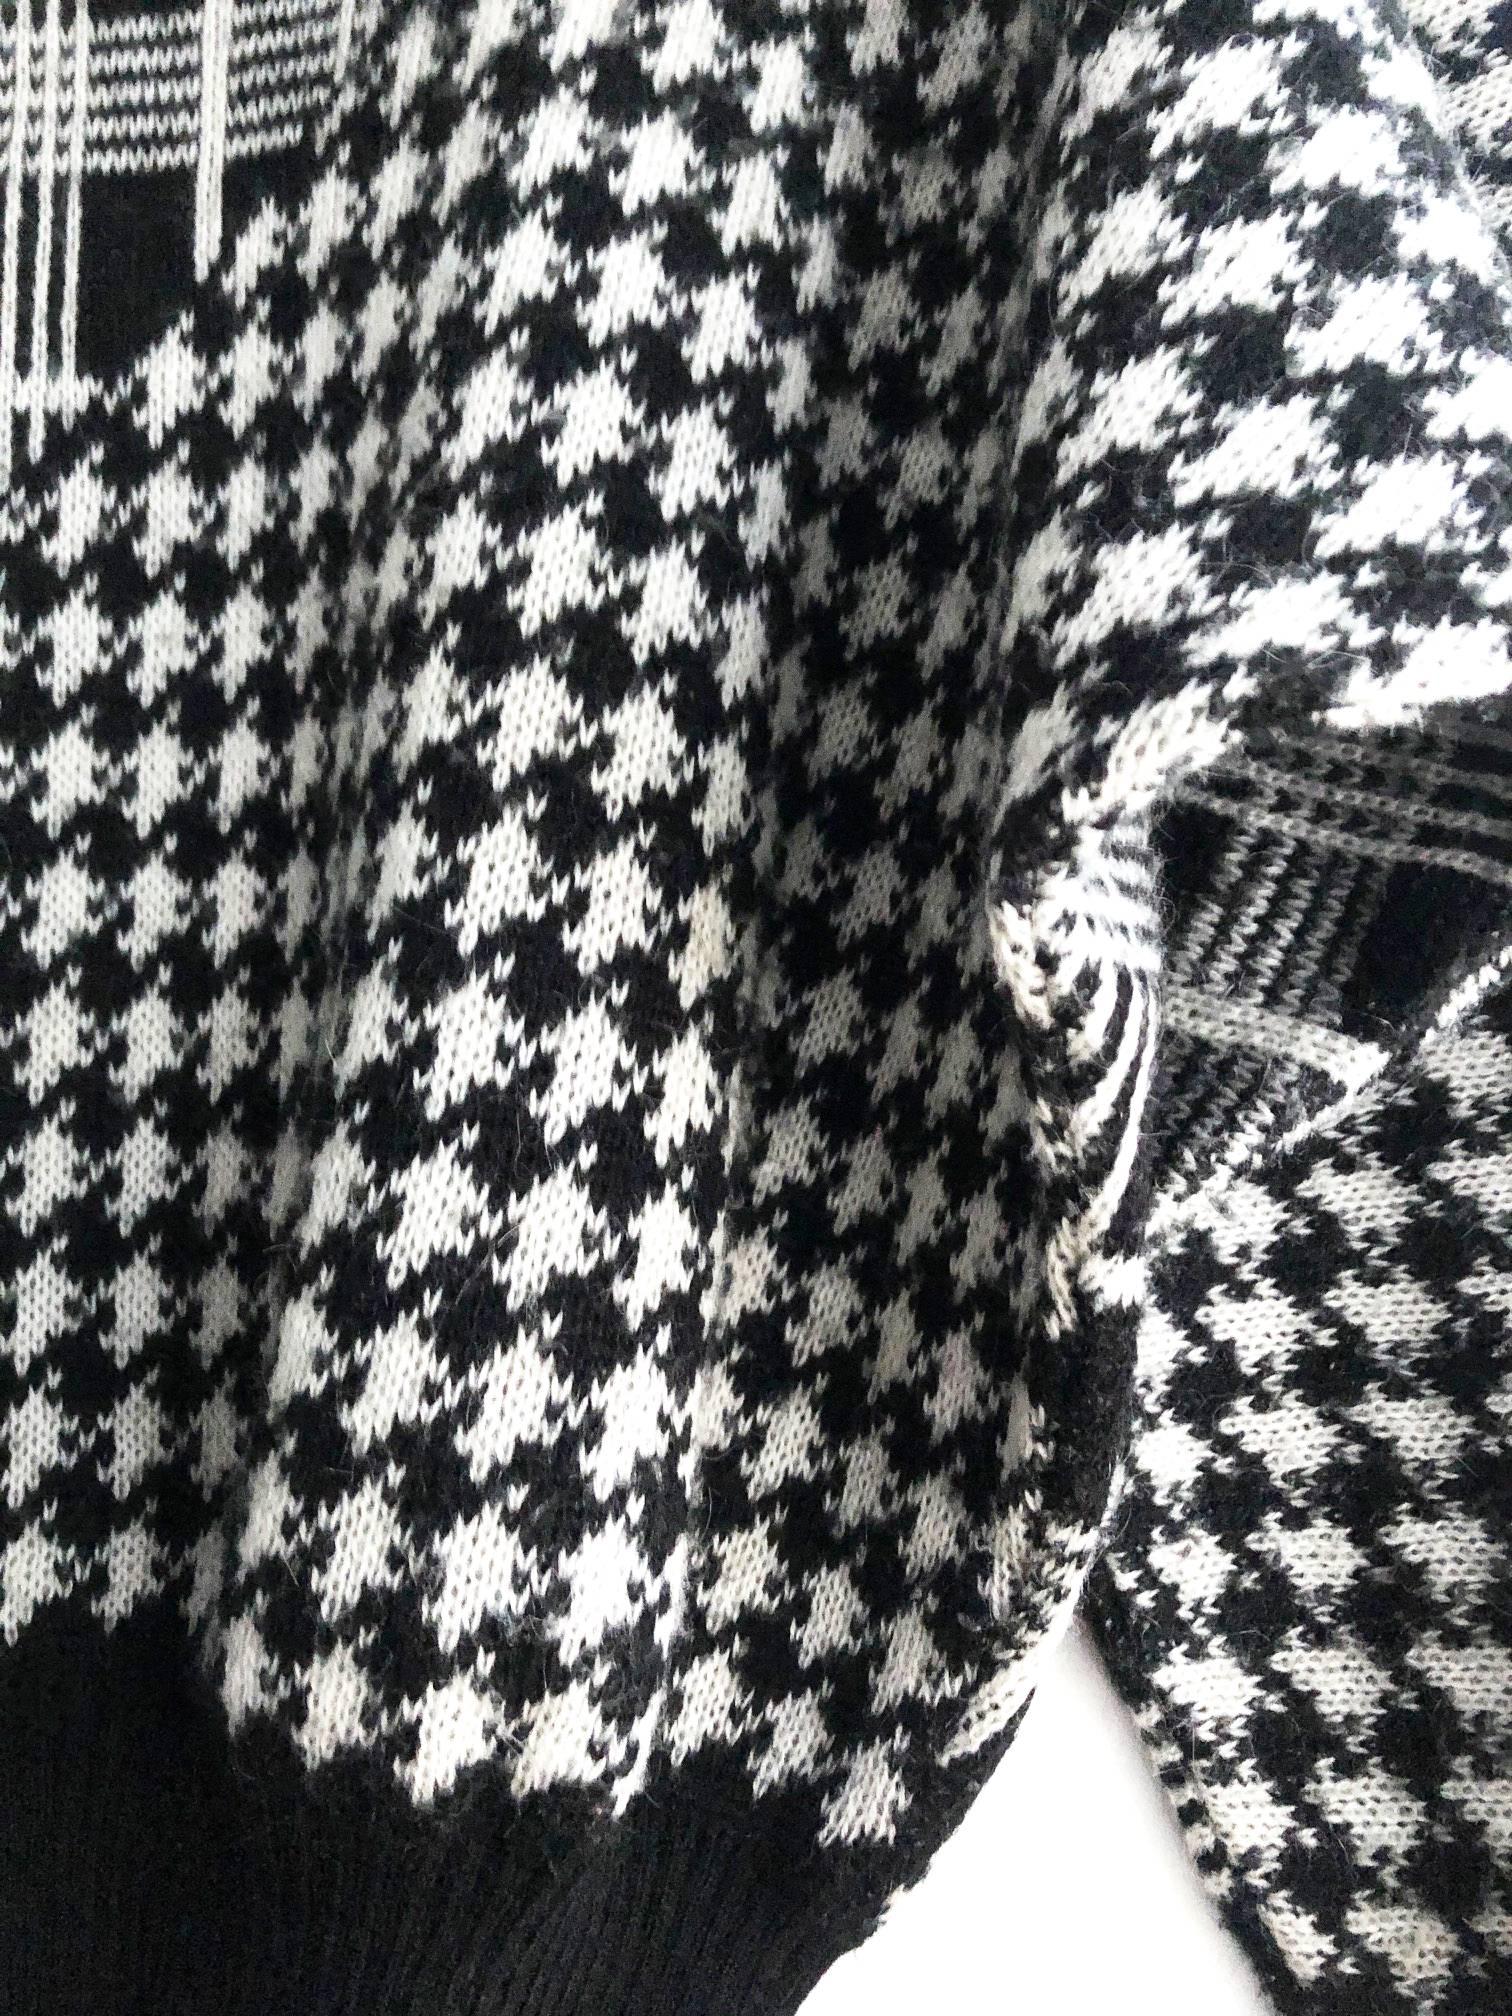 Women's 1970s/1980s Christian Dior Black and White Bat Wing Houndstooth Print Sweater 